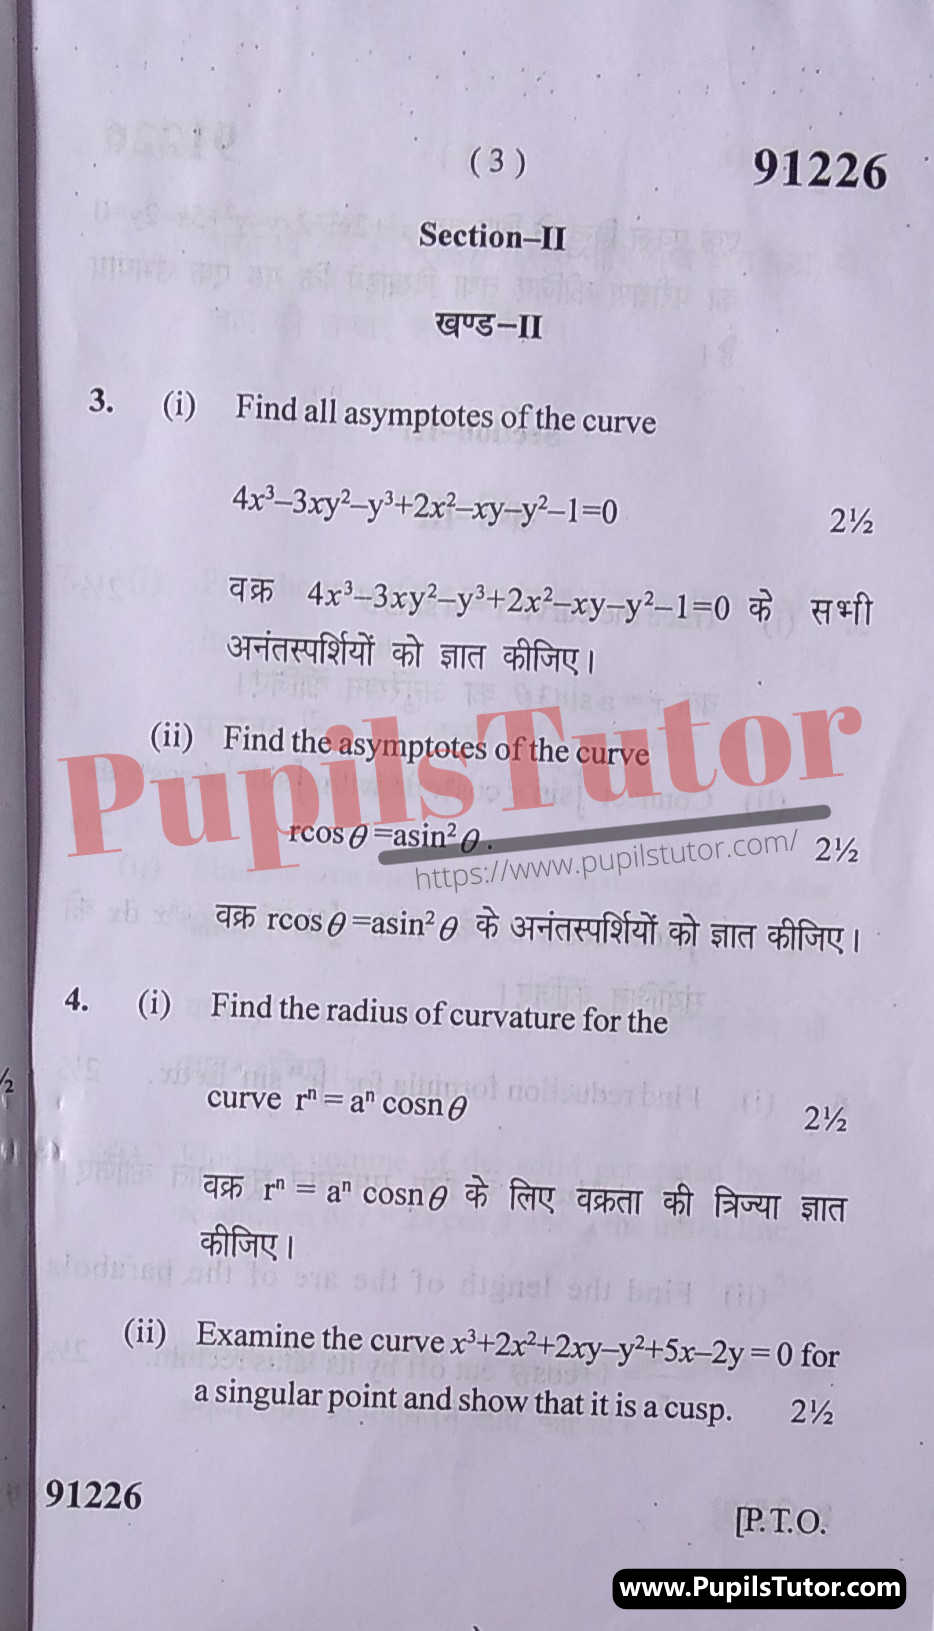 Free Download PDF Of M.D. University B.A. First Semester Latest Question Paper For Maths (Calculus) Subject (Page 3) - https://www.pupilstutor.com